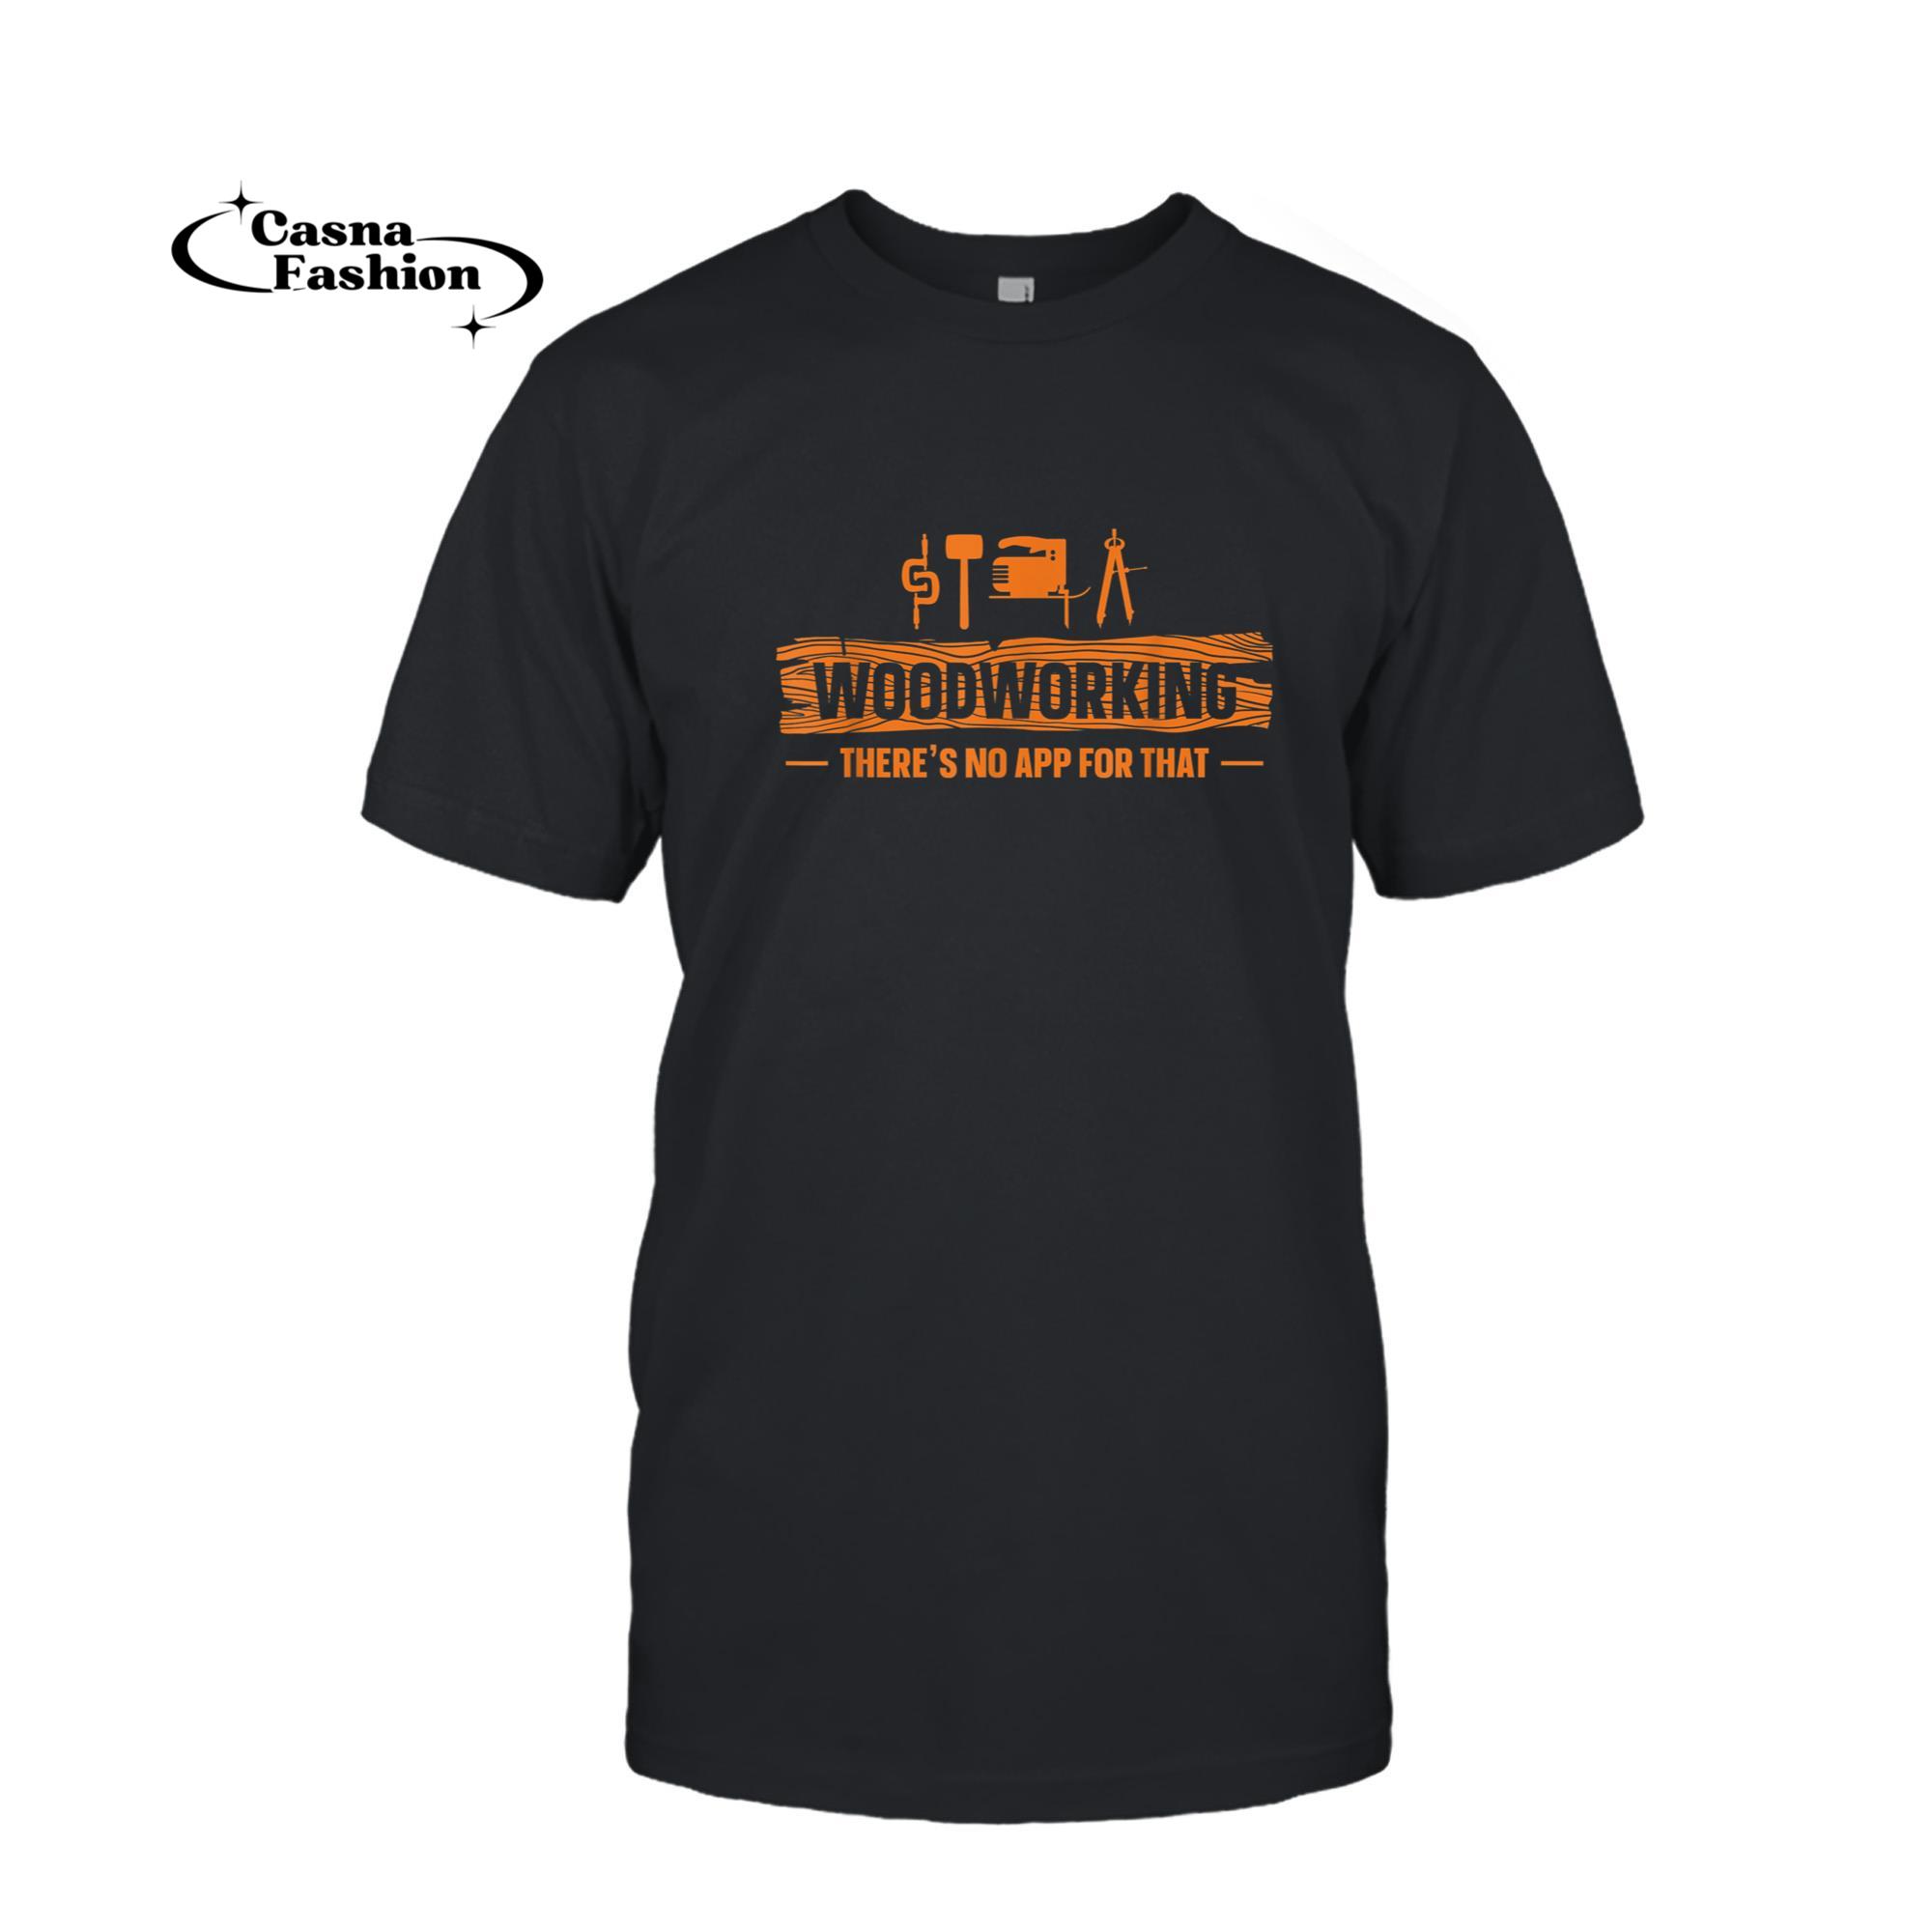 casnafashion_T-shirt_Woodworking There's No App Circular Saw Jigsaw Woodworker T-Shirt_T-shirt_Black